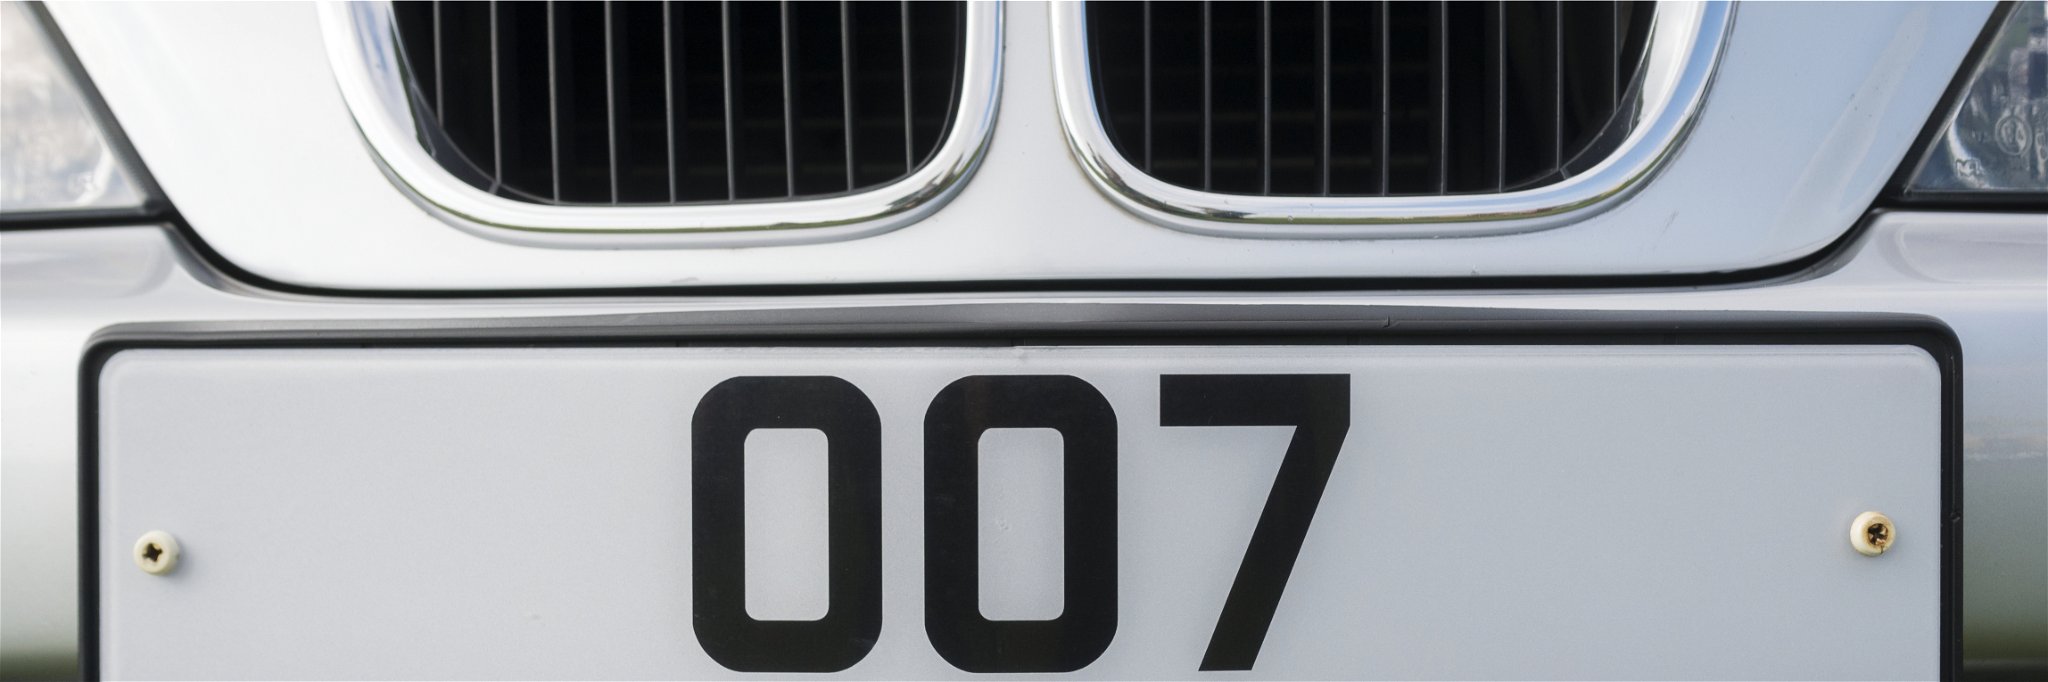 The exclusive James Bond-themed international trip will include the chance to recreate famed high-speed chase scenes, complete with luxury super-cars.

